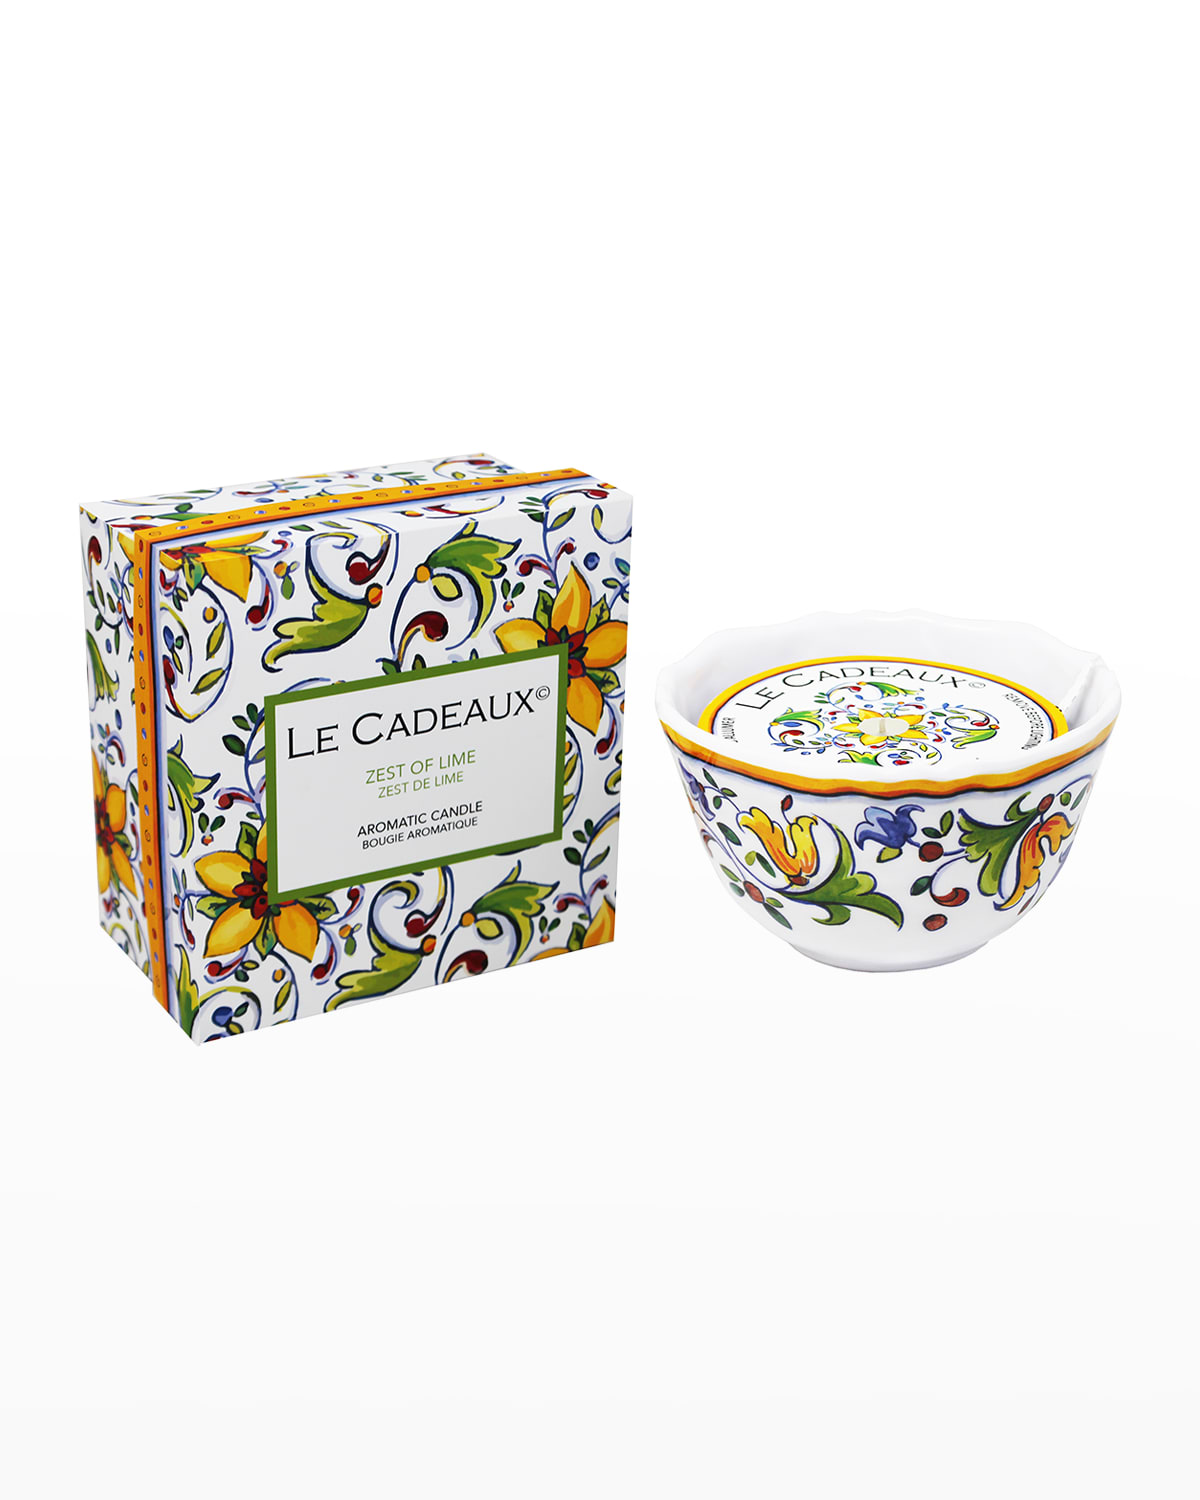 Le Cadeaux Candle In Gift Box In Zest Of Lime